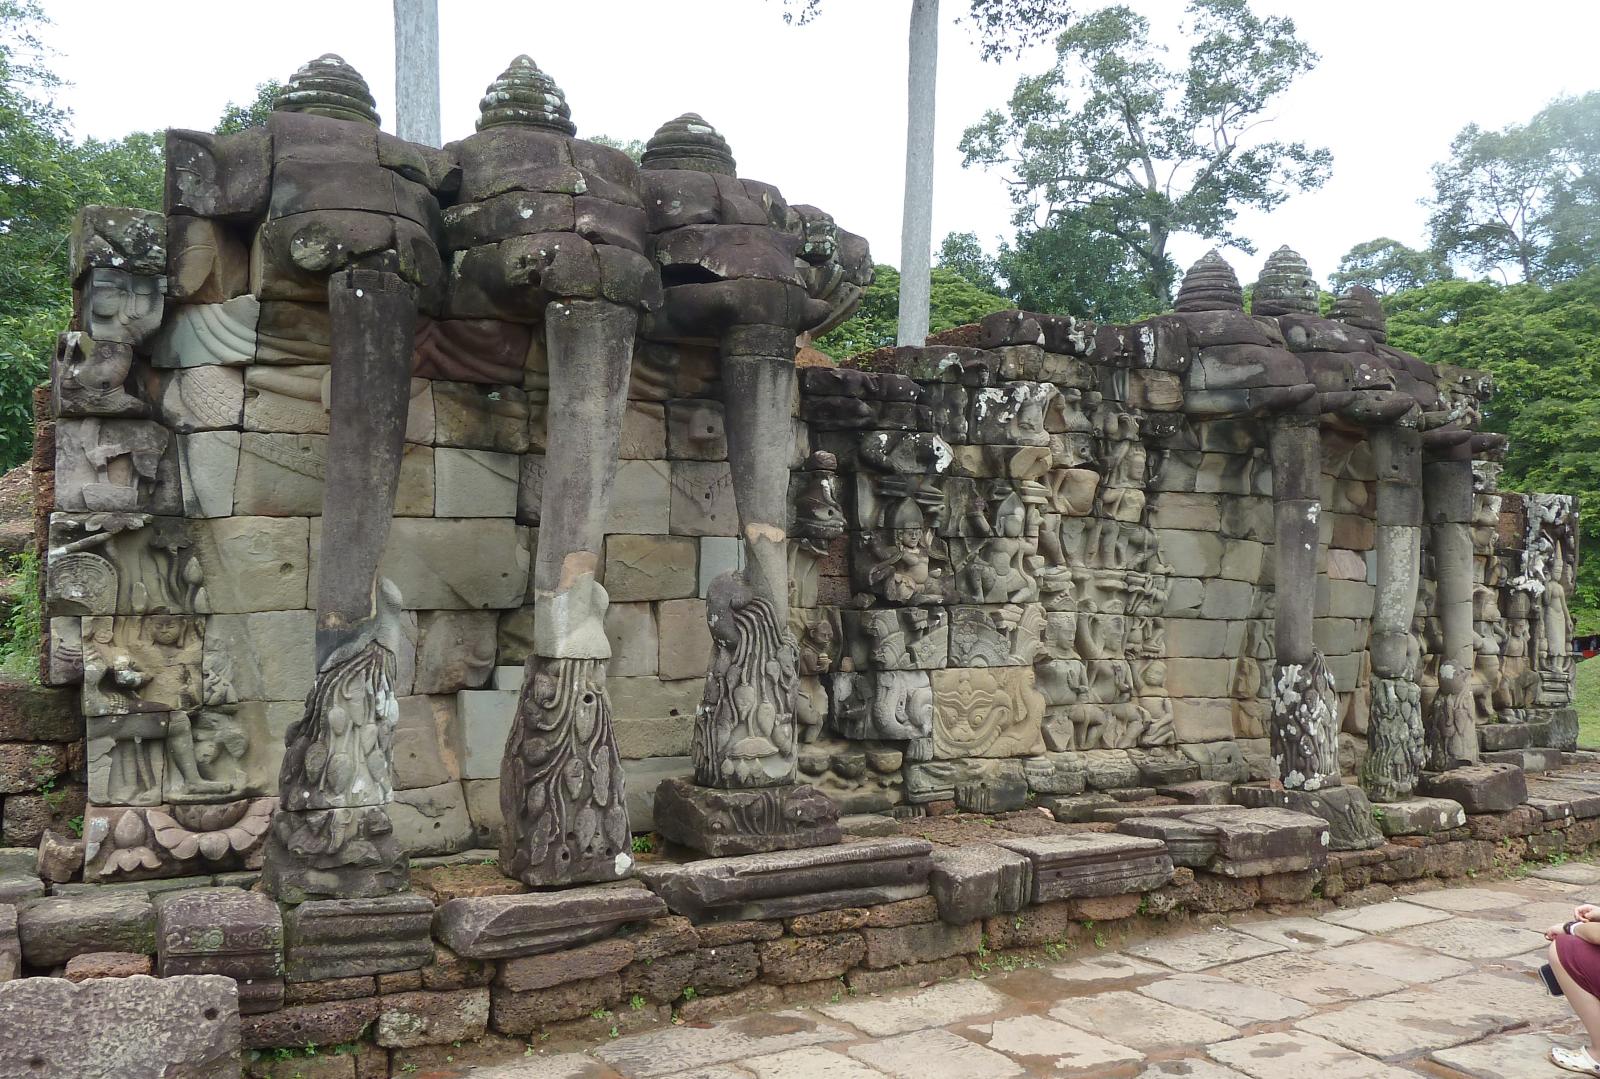 the stone carvings of this building are made out of rock